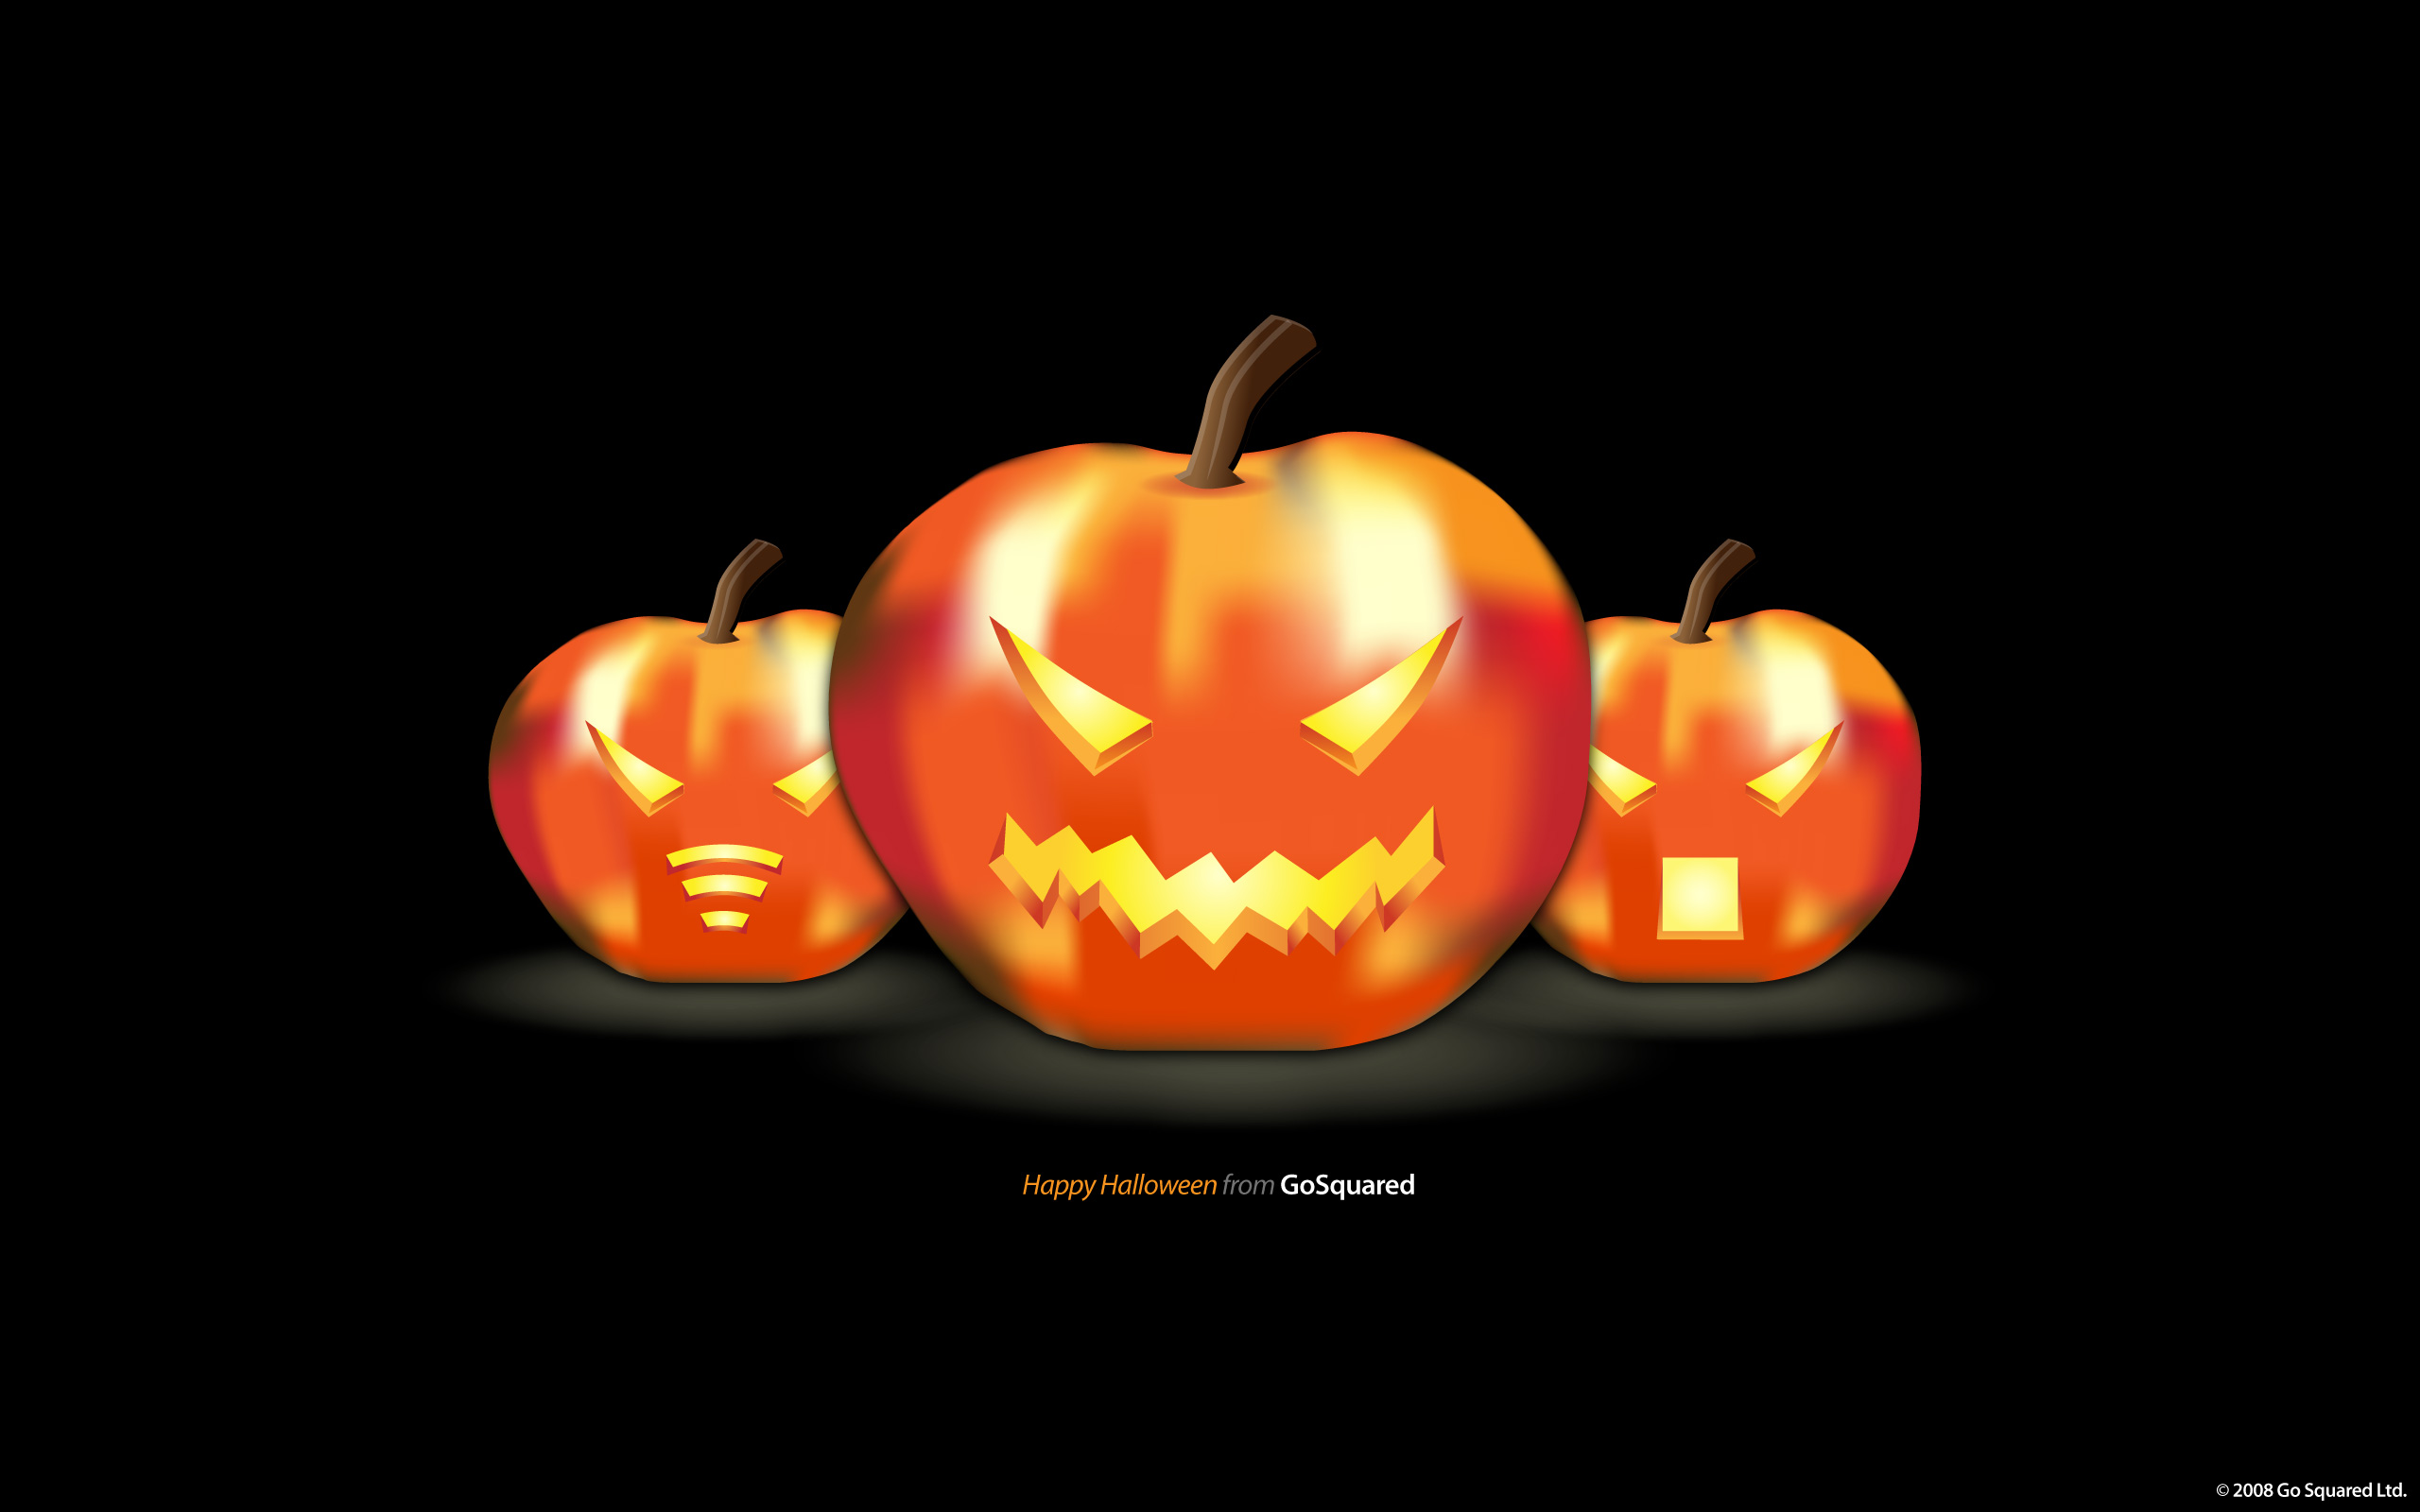 Have A Happy Halloween Wallpaper Gosquared